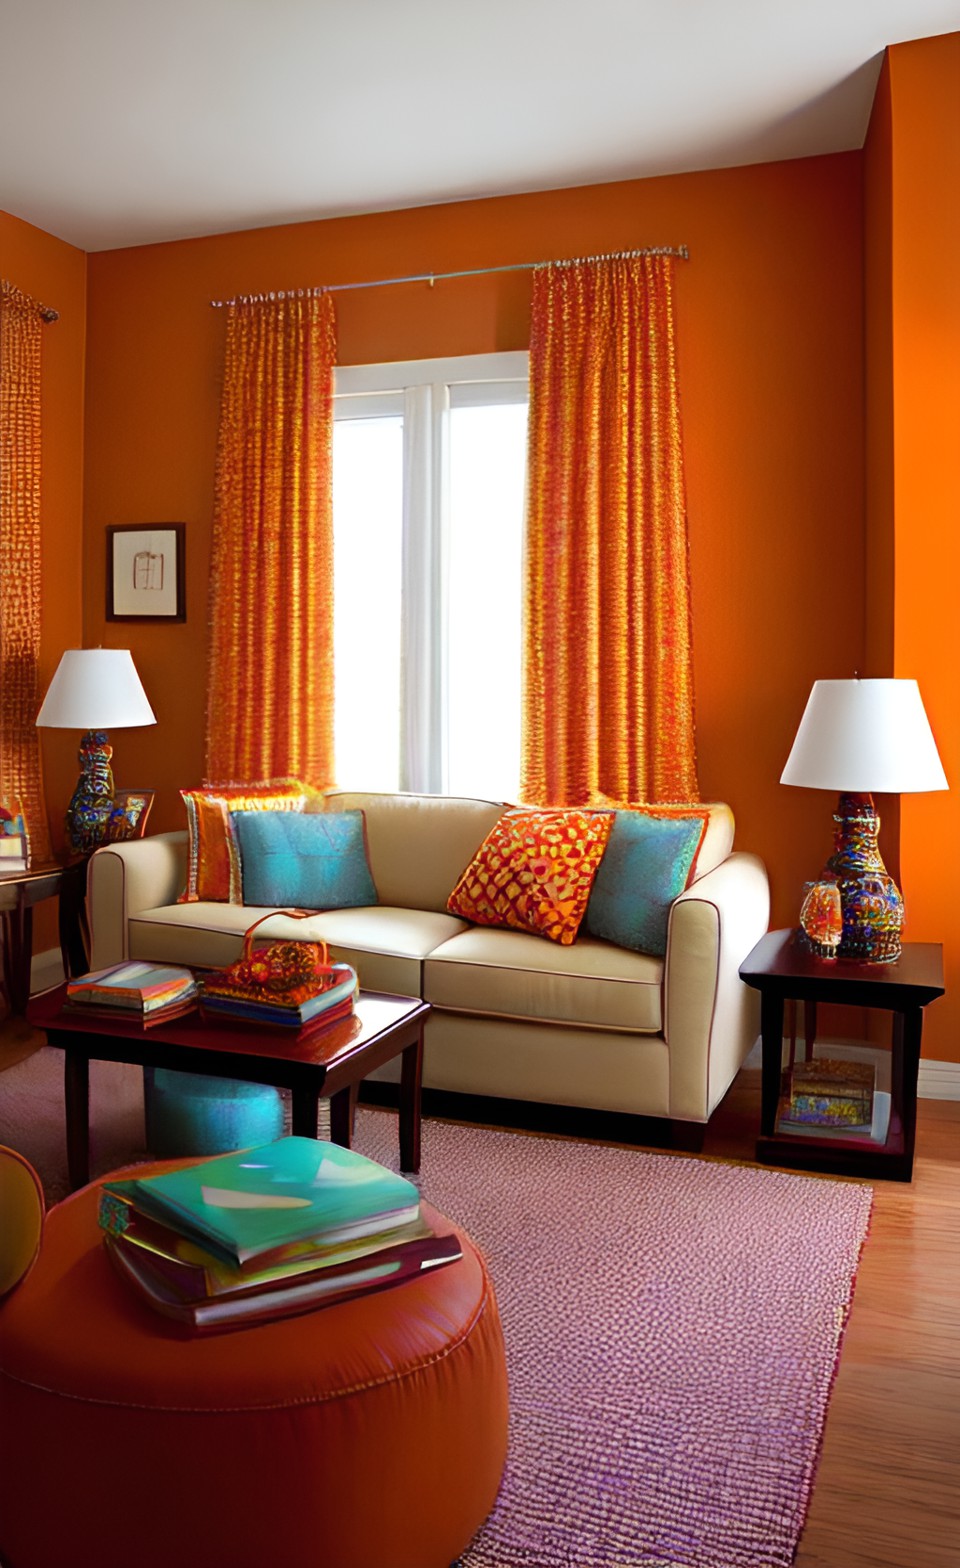 Curtains for Orange Walls